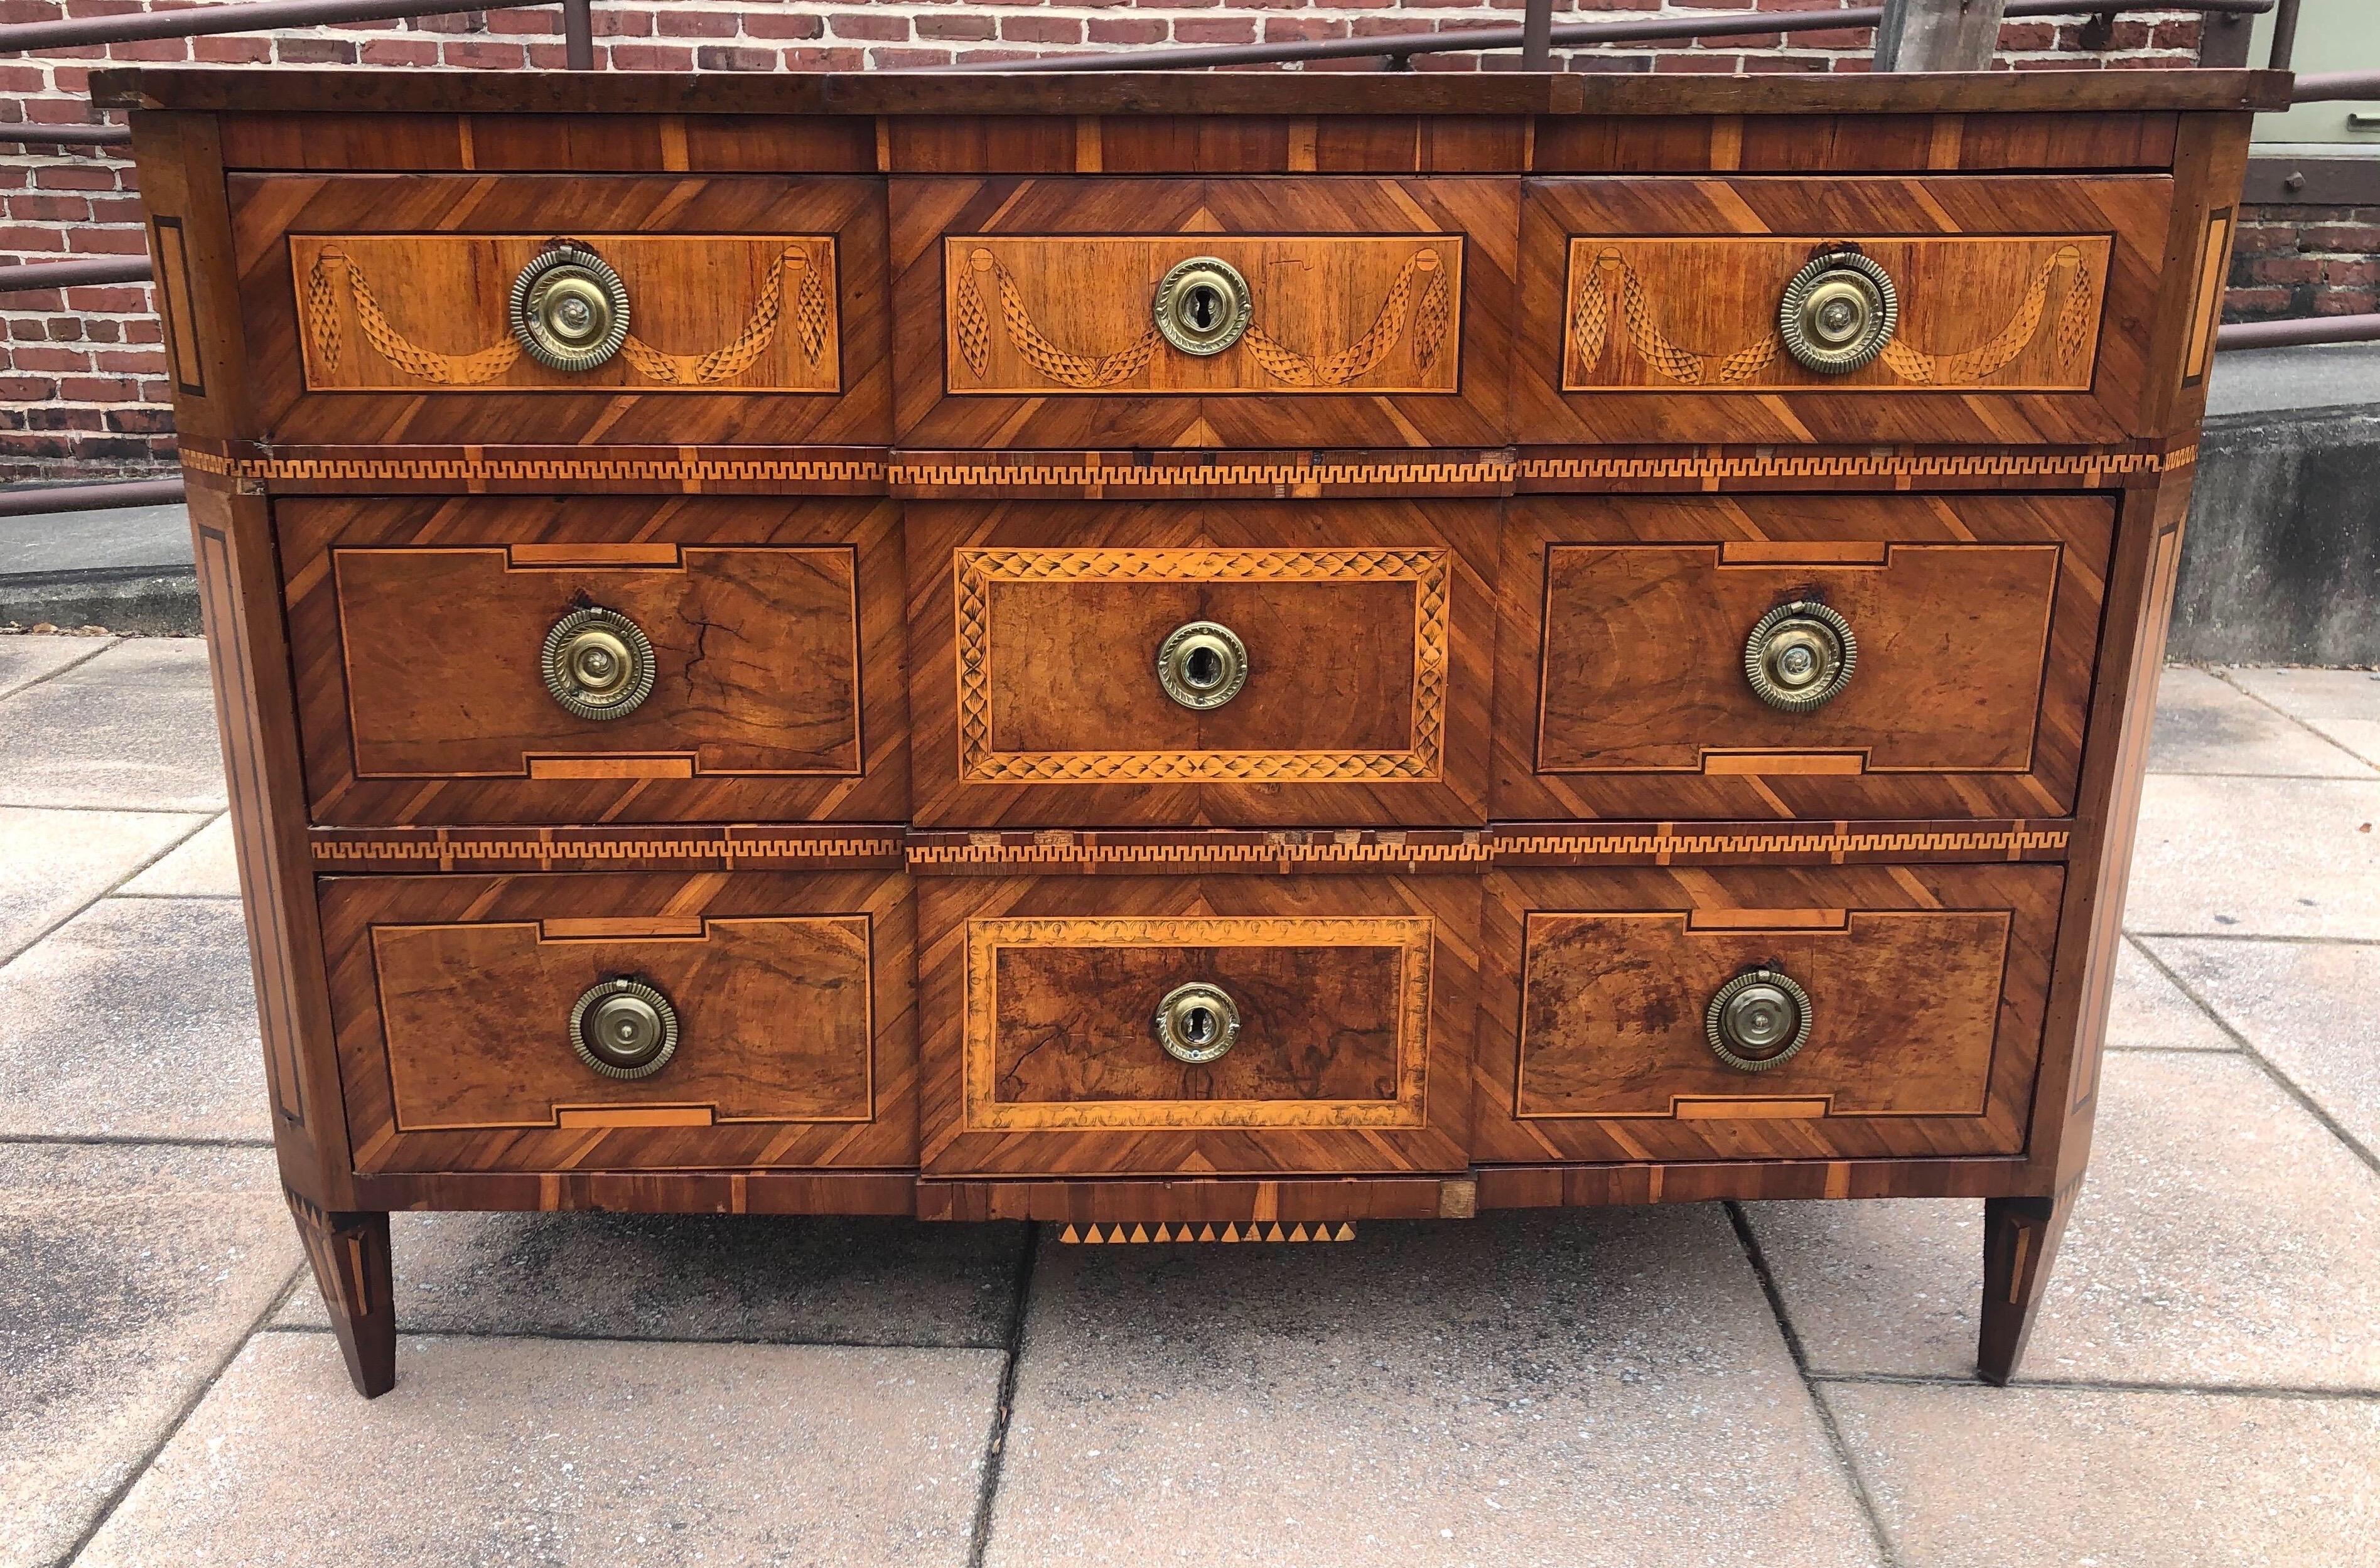 Gorgeous color on this 18th-19th century Italian neoclassical inlaid commode. Stout three drawer commode with navigational rose on the top and swags/tassels on the sides and top drawer faces. Crossbanding and geometric motifs inlaid throughout.